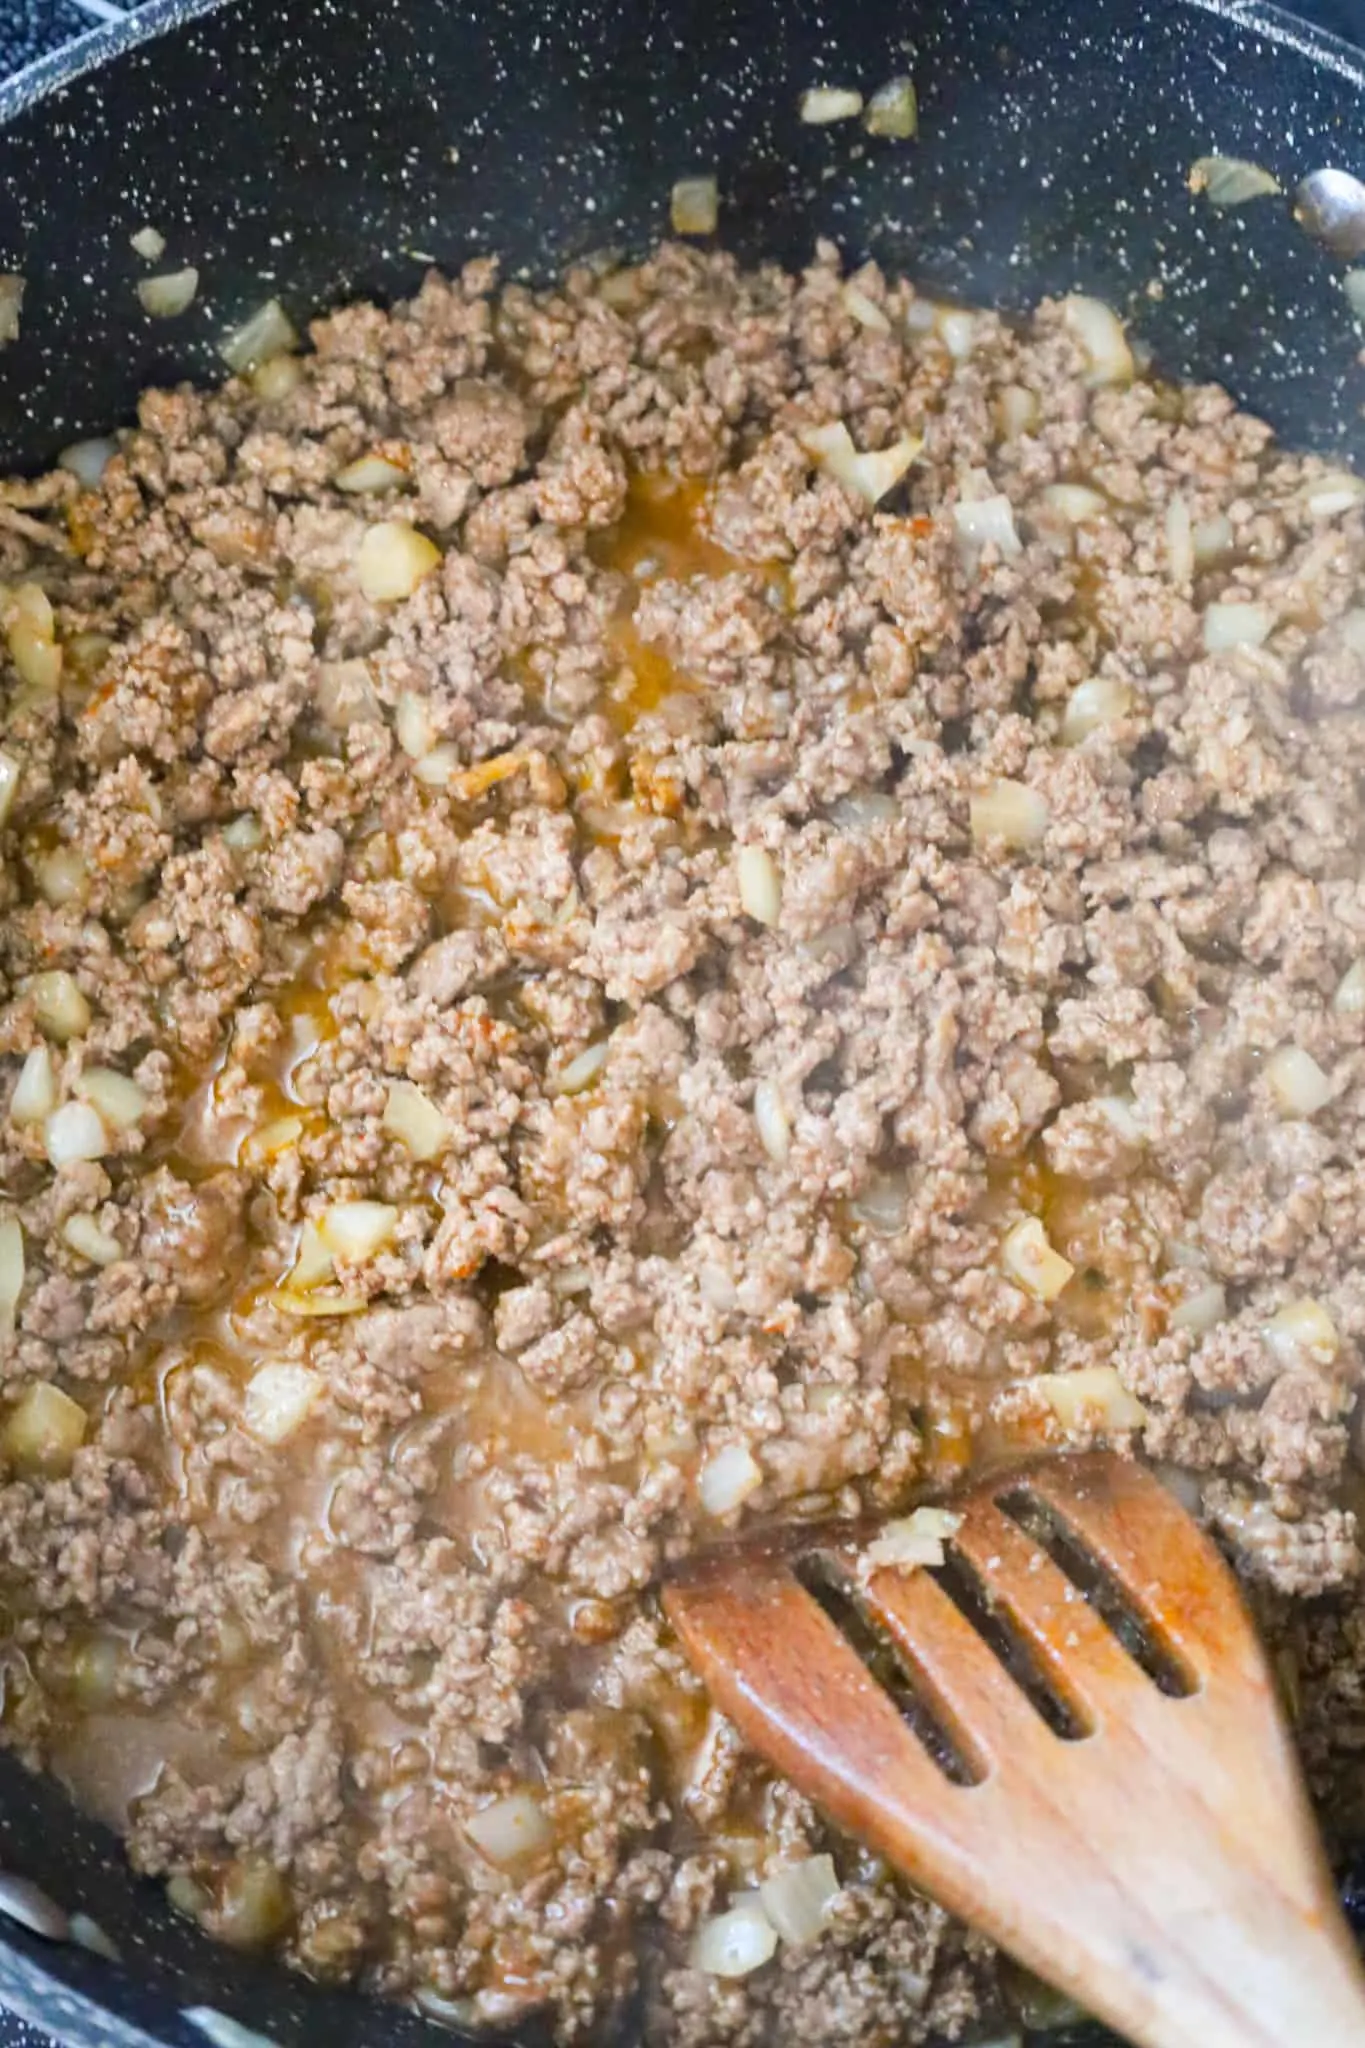 ground beef and taco seasoning mixture simmering in a saute pan